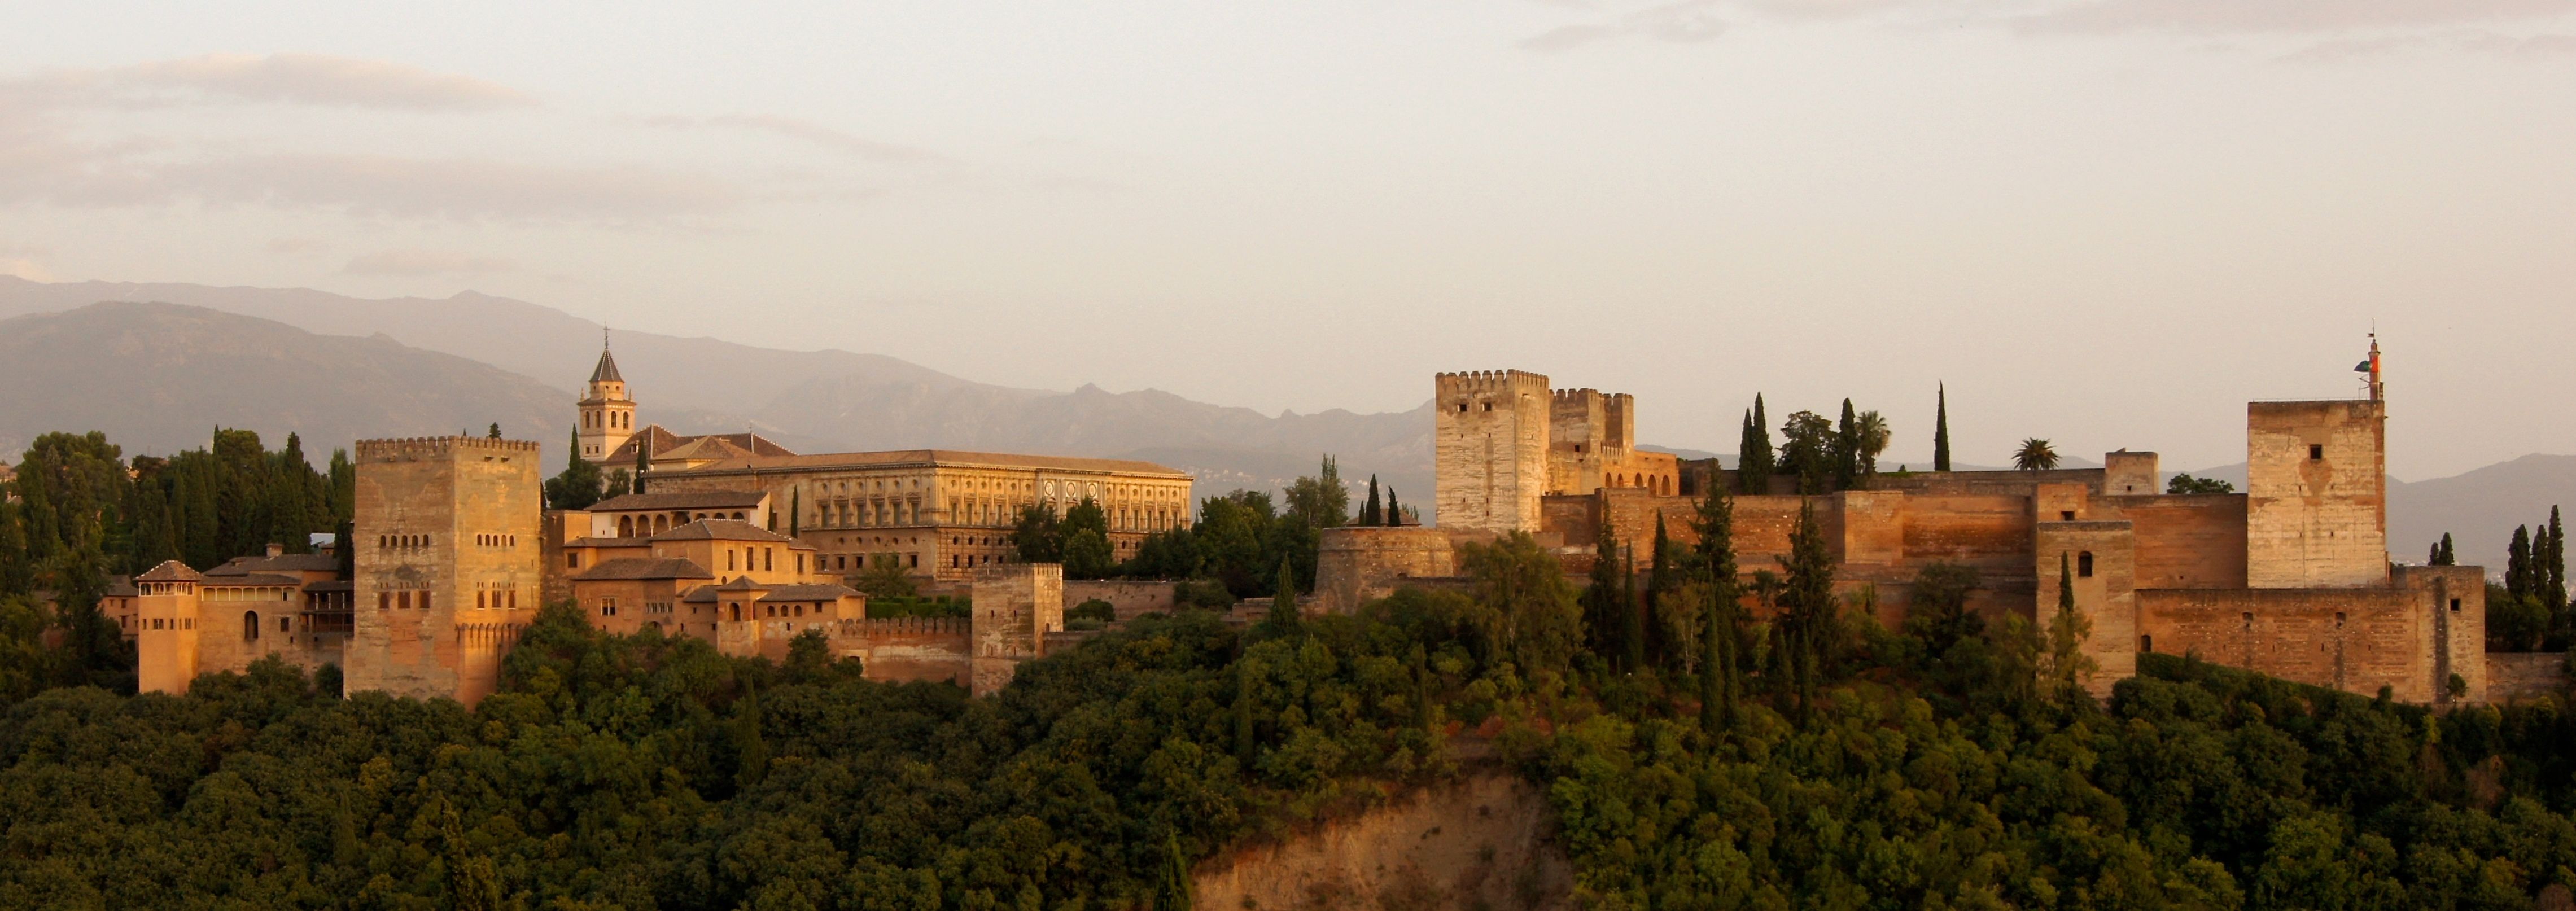 A picture of the Alhambra at dusk.